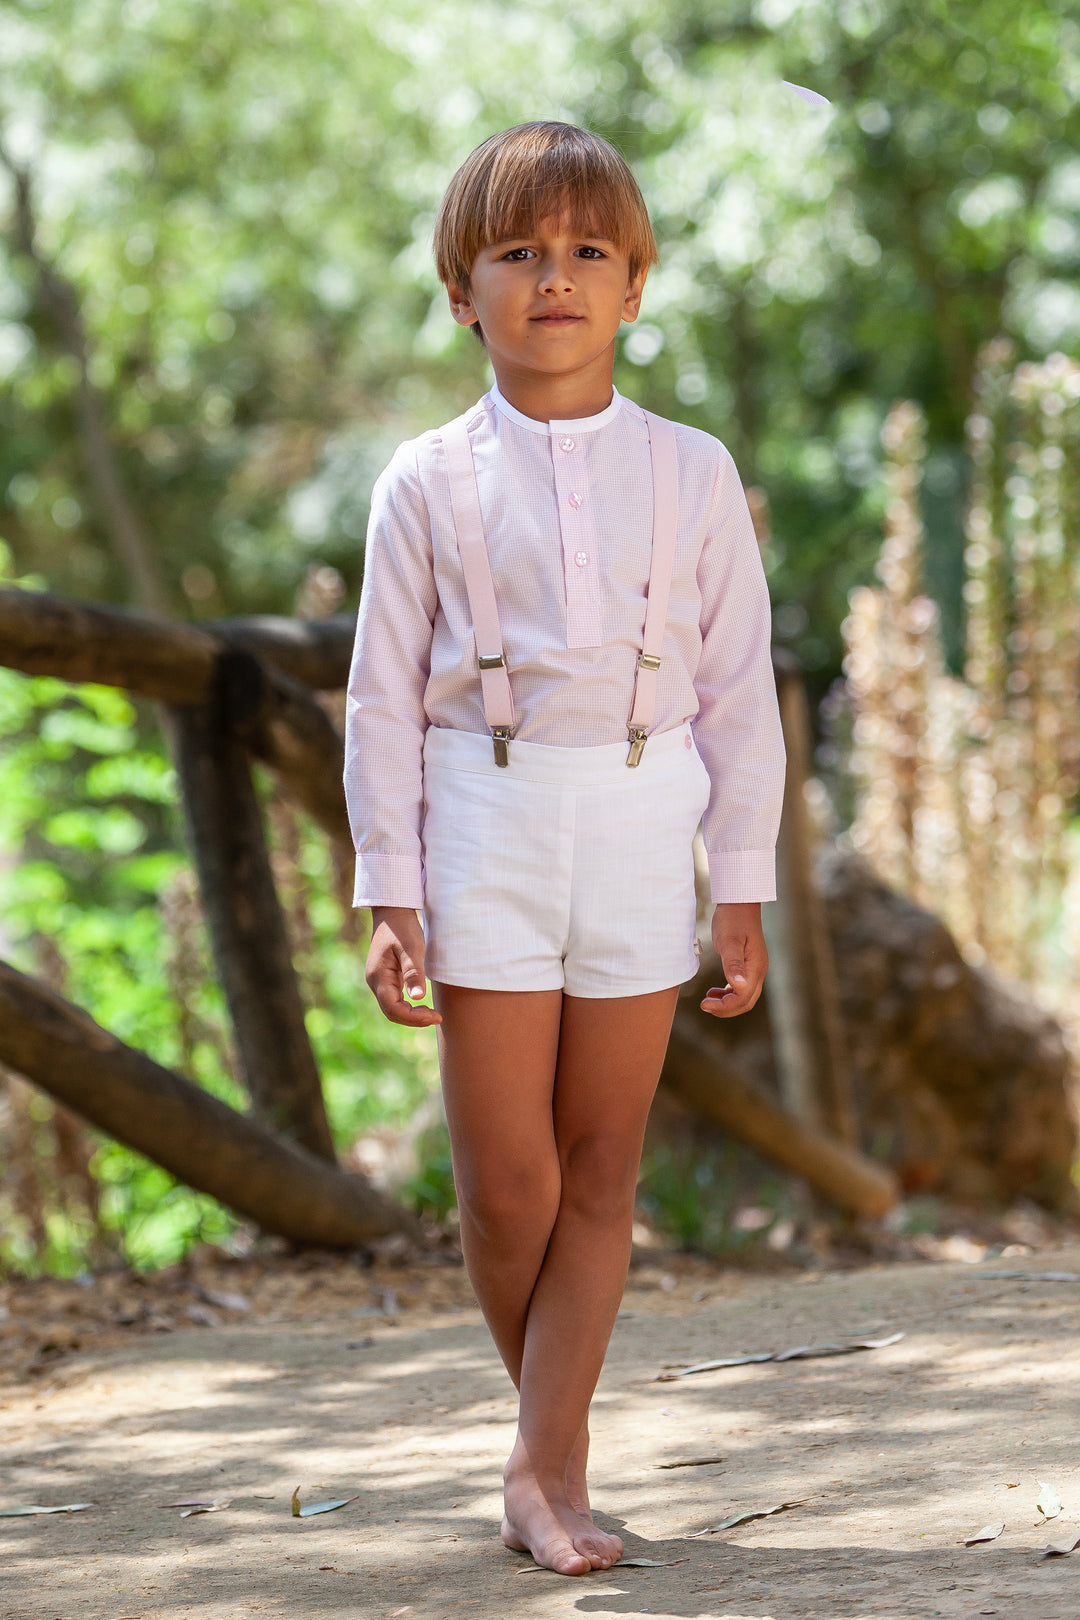 Abuela Tata PREORDER | "Matteo" Pink Gingham Shirt & Shorts with Braces | Millie and John